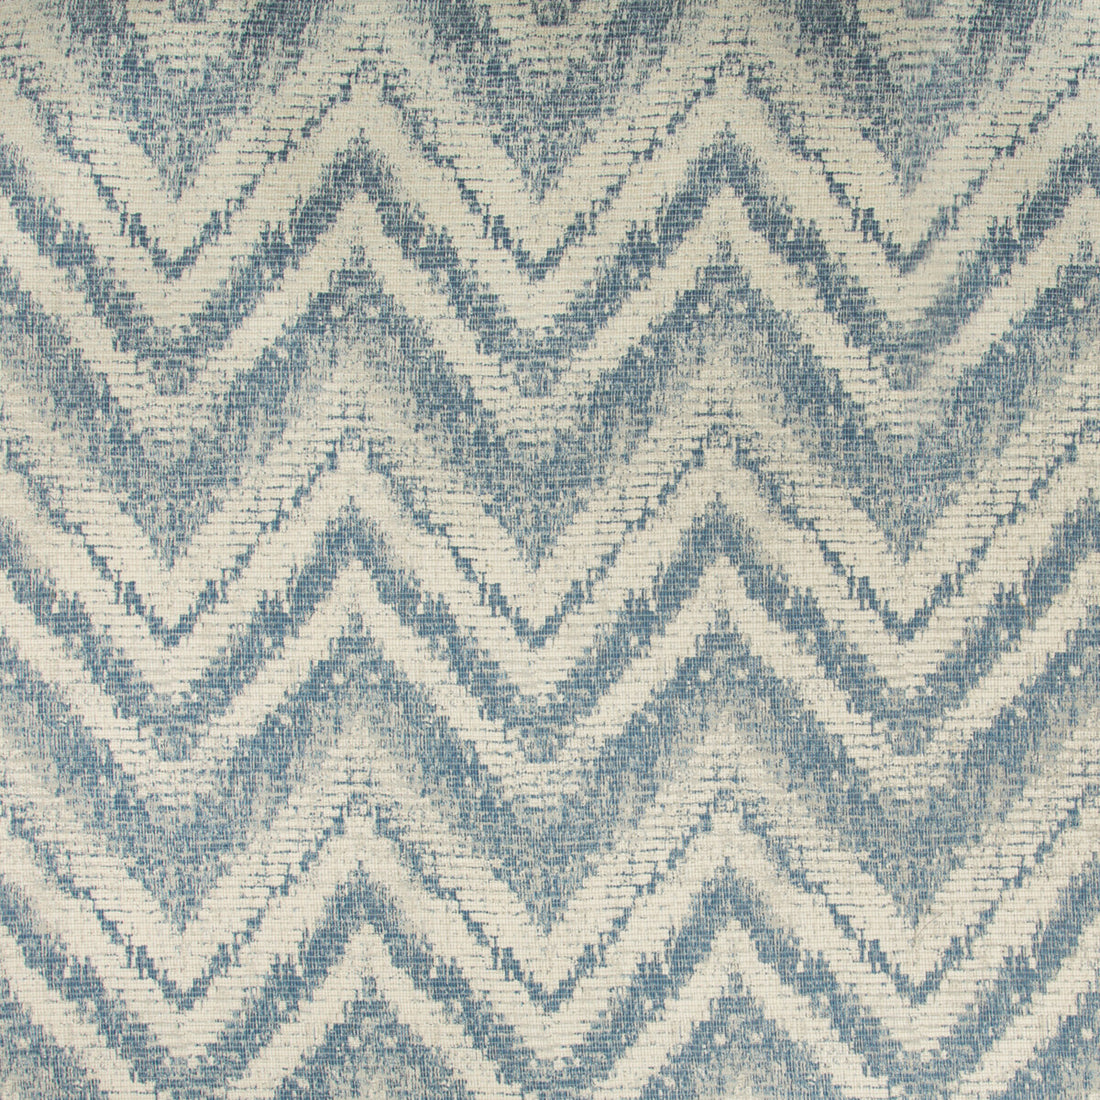 Grand Baie fabric in marine color - pattern 34862.15.0 - by Kravet Design in the Oceania Indoor Outdoor collection